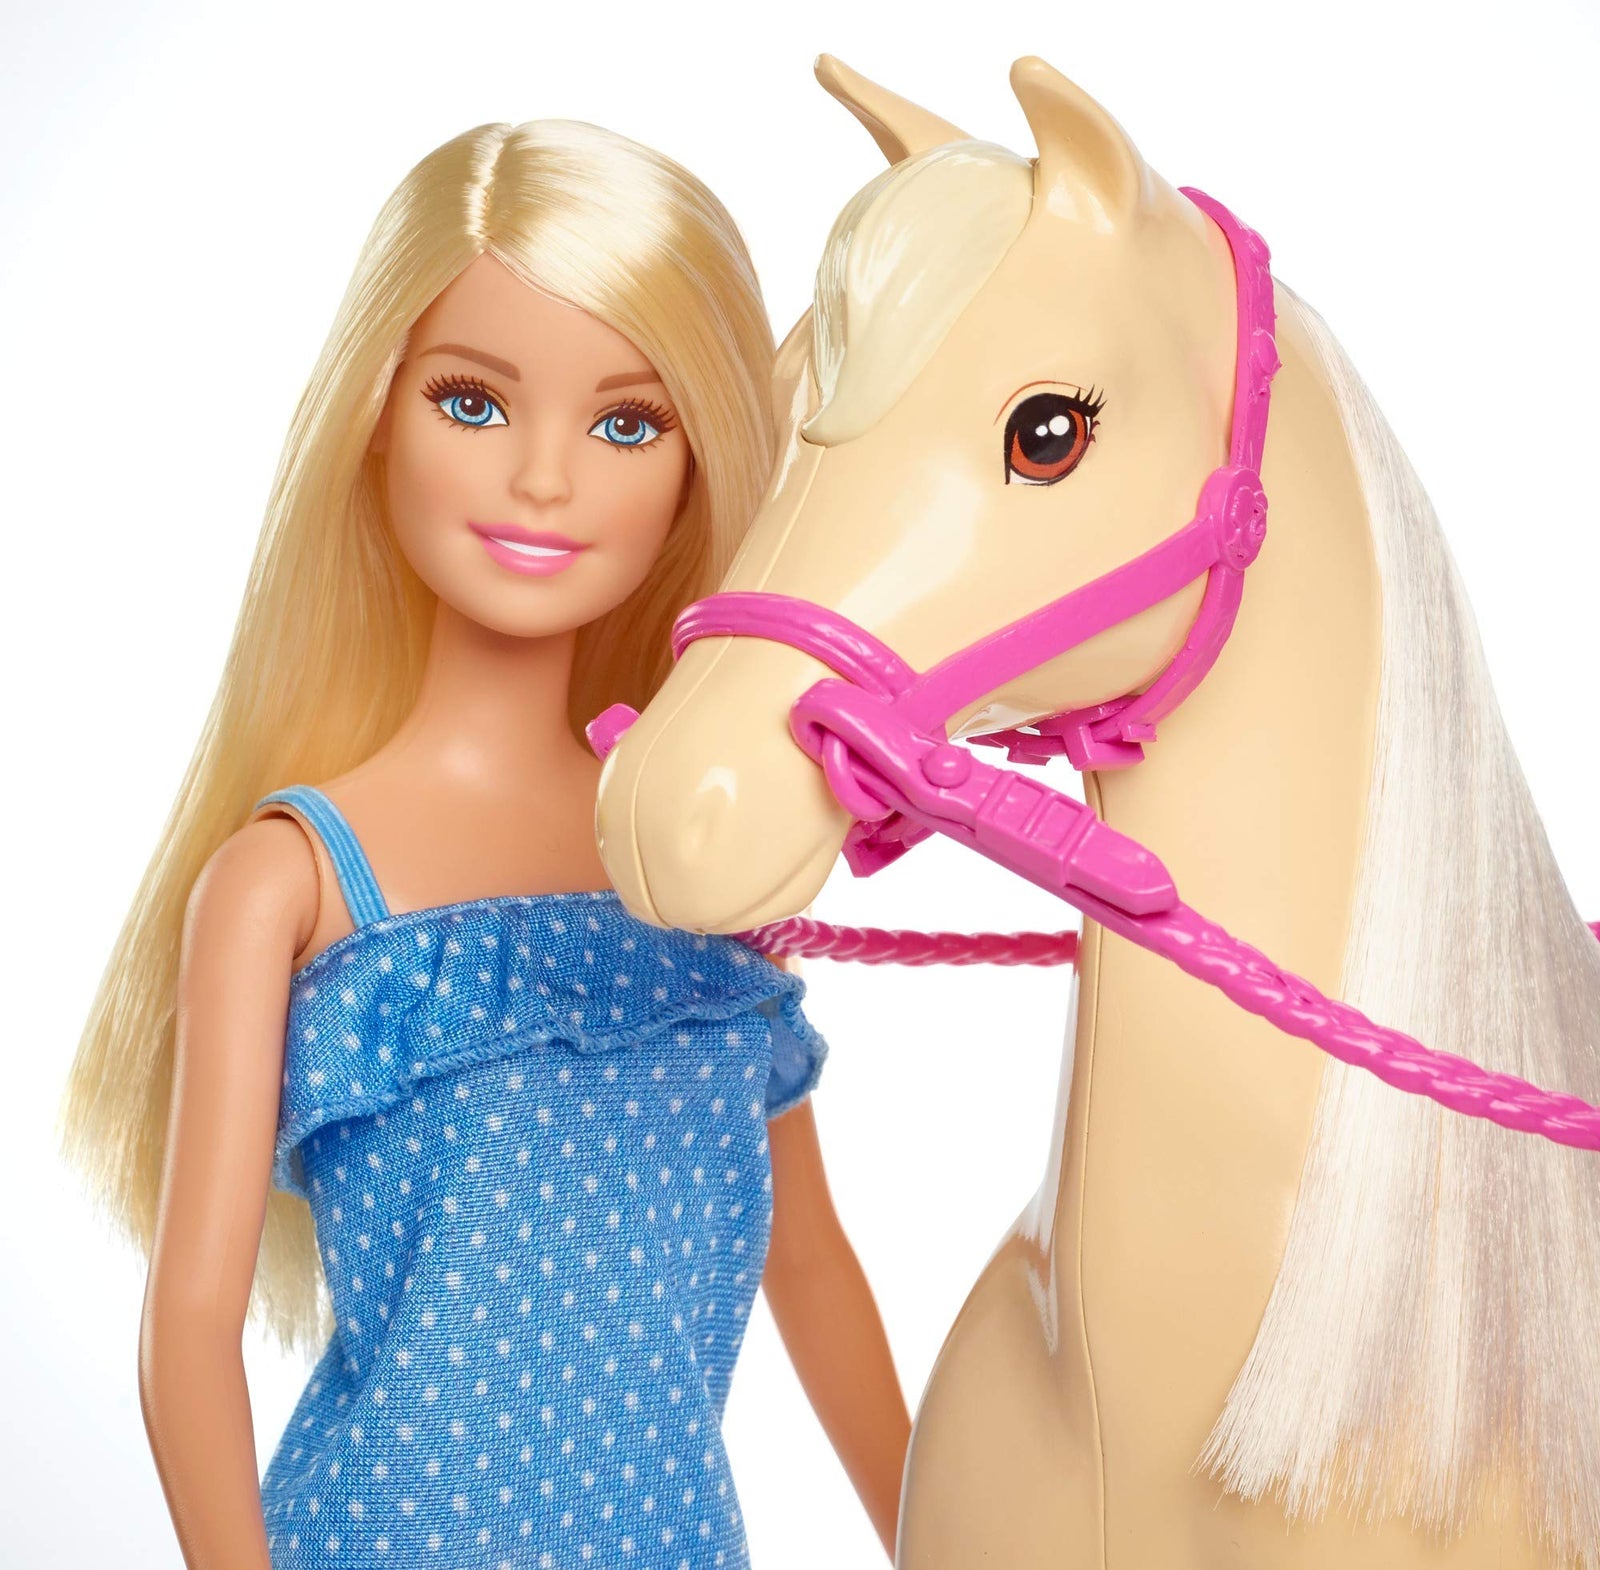 Barbie Doll, Blonde, Wearing Riding Outfit with Helmet, and Light Brown Horse with Soft White Mane and Tail, Gift for 3 to 7 Year Olds